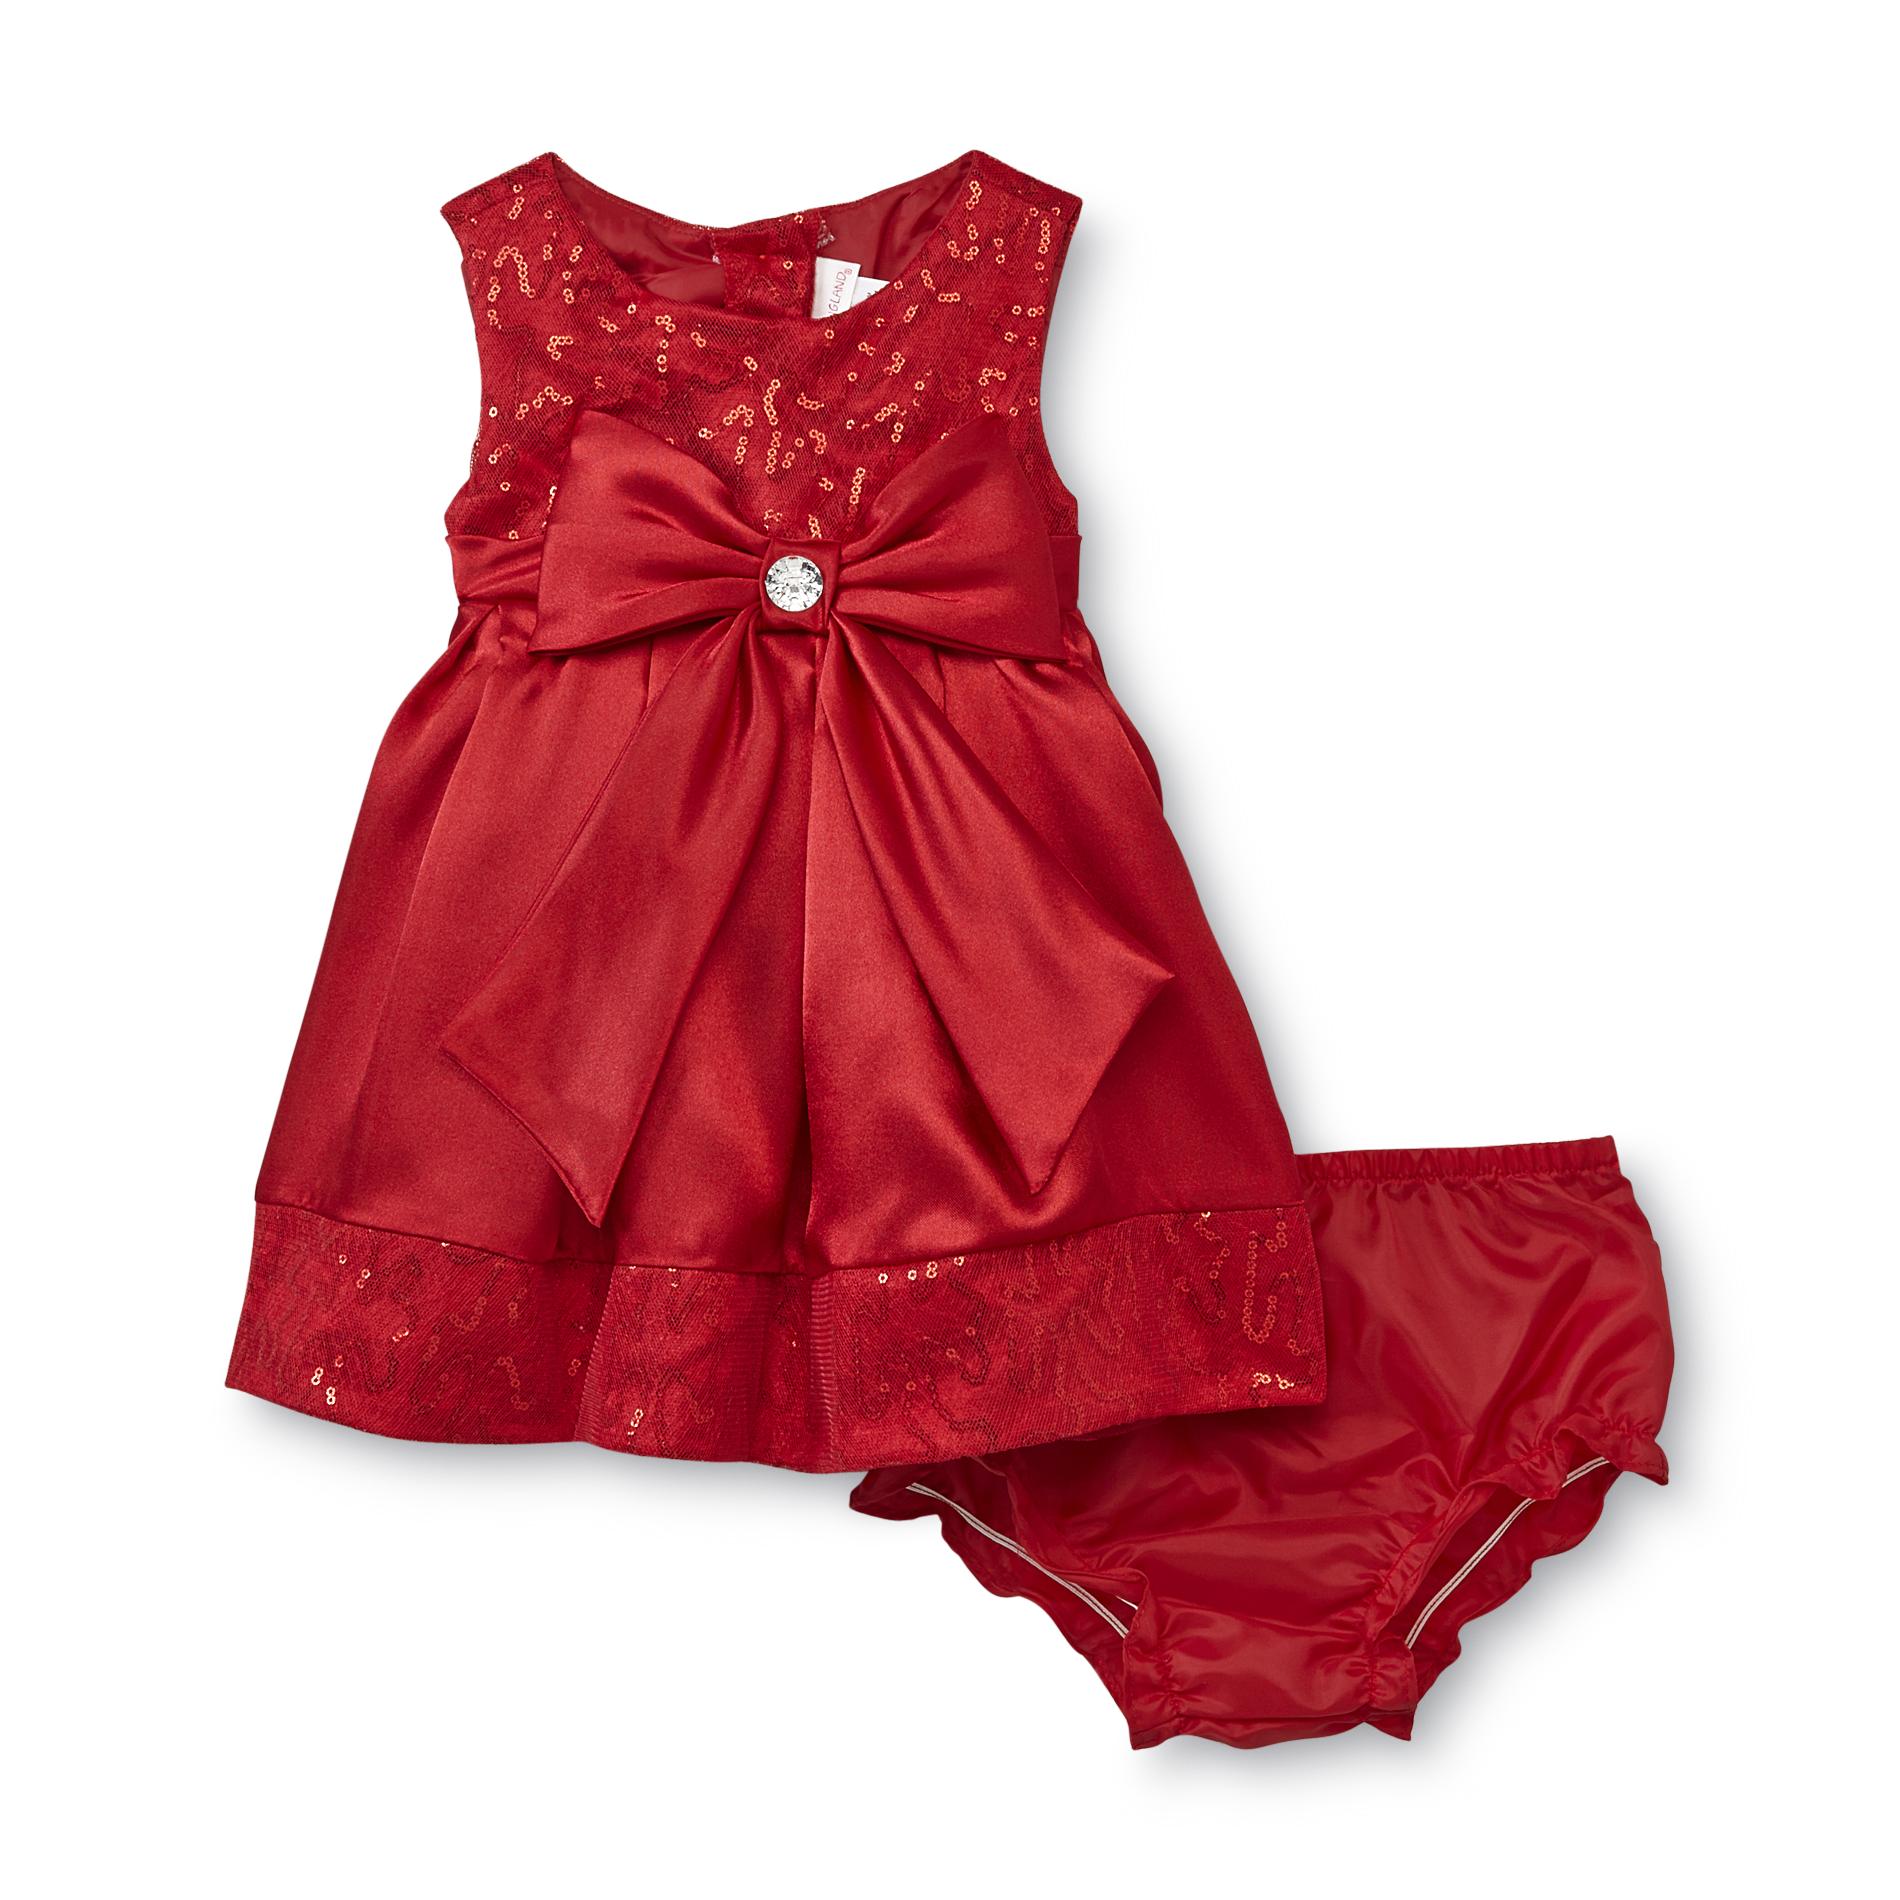 Youngland Infant & Toddler Girl's Sequin Party Dress & Diaper Cover